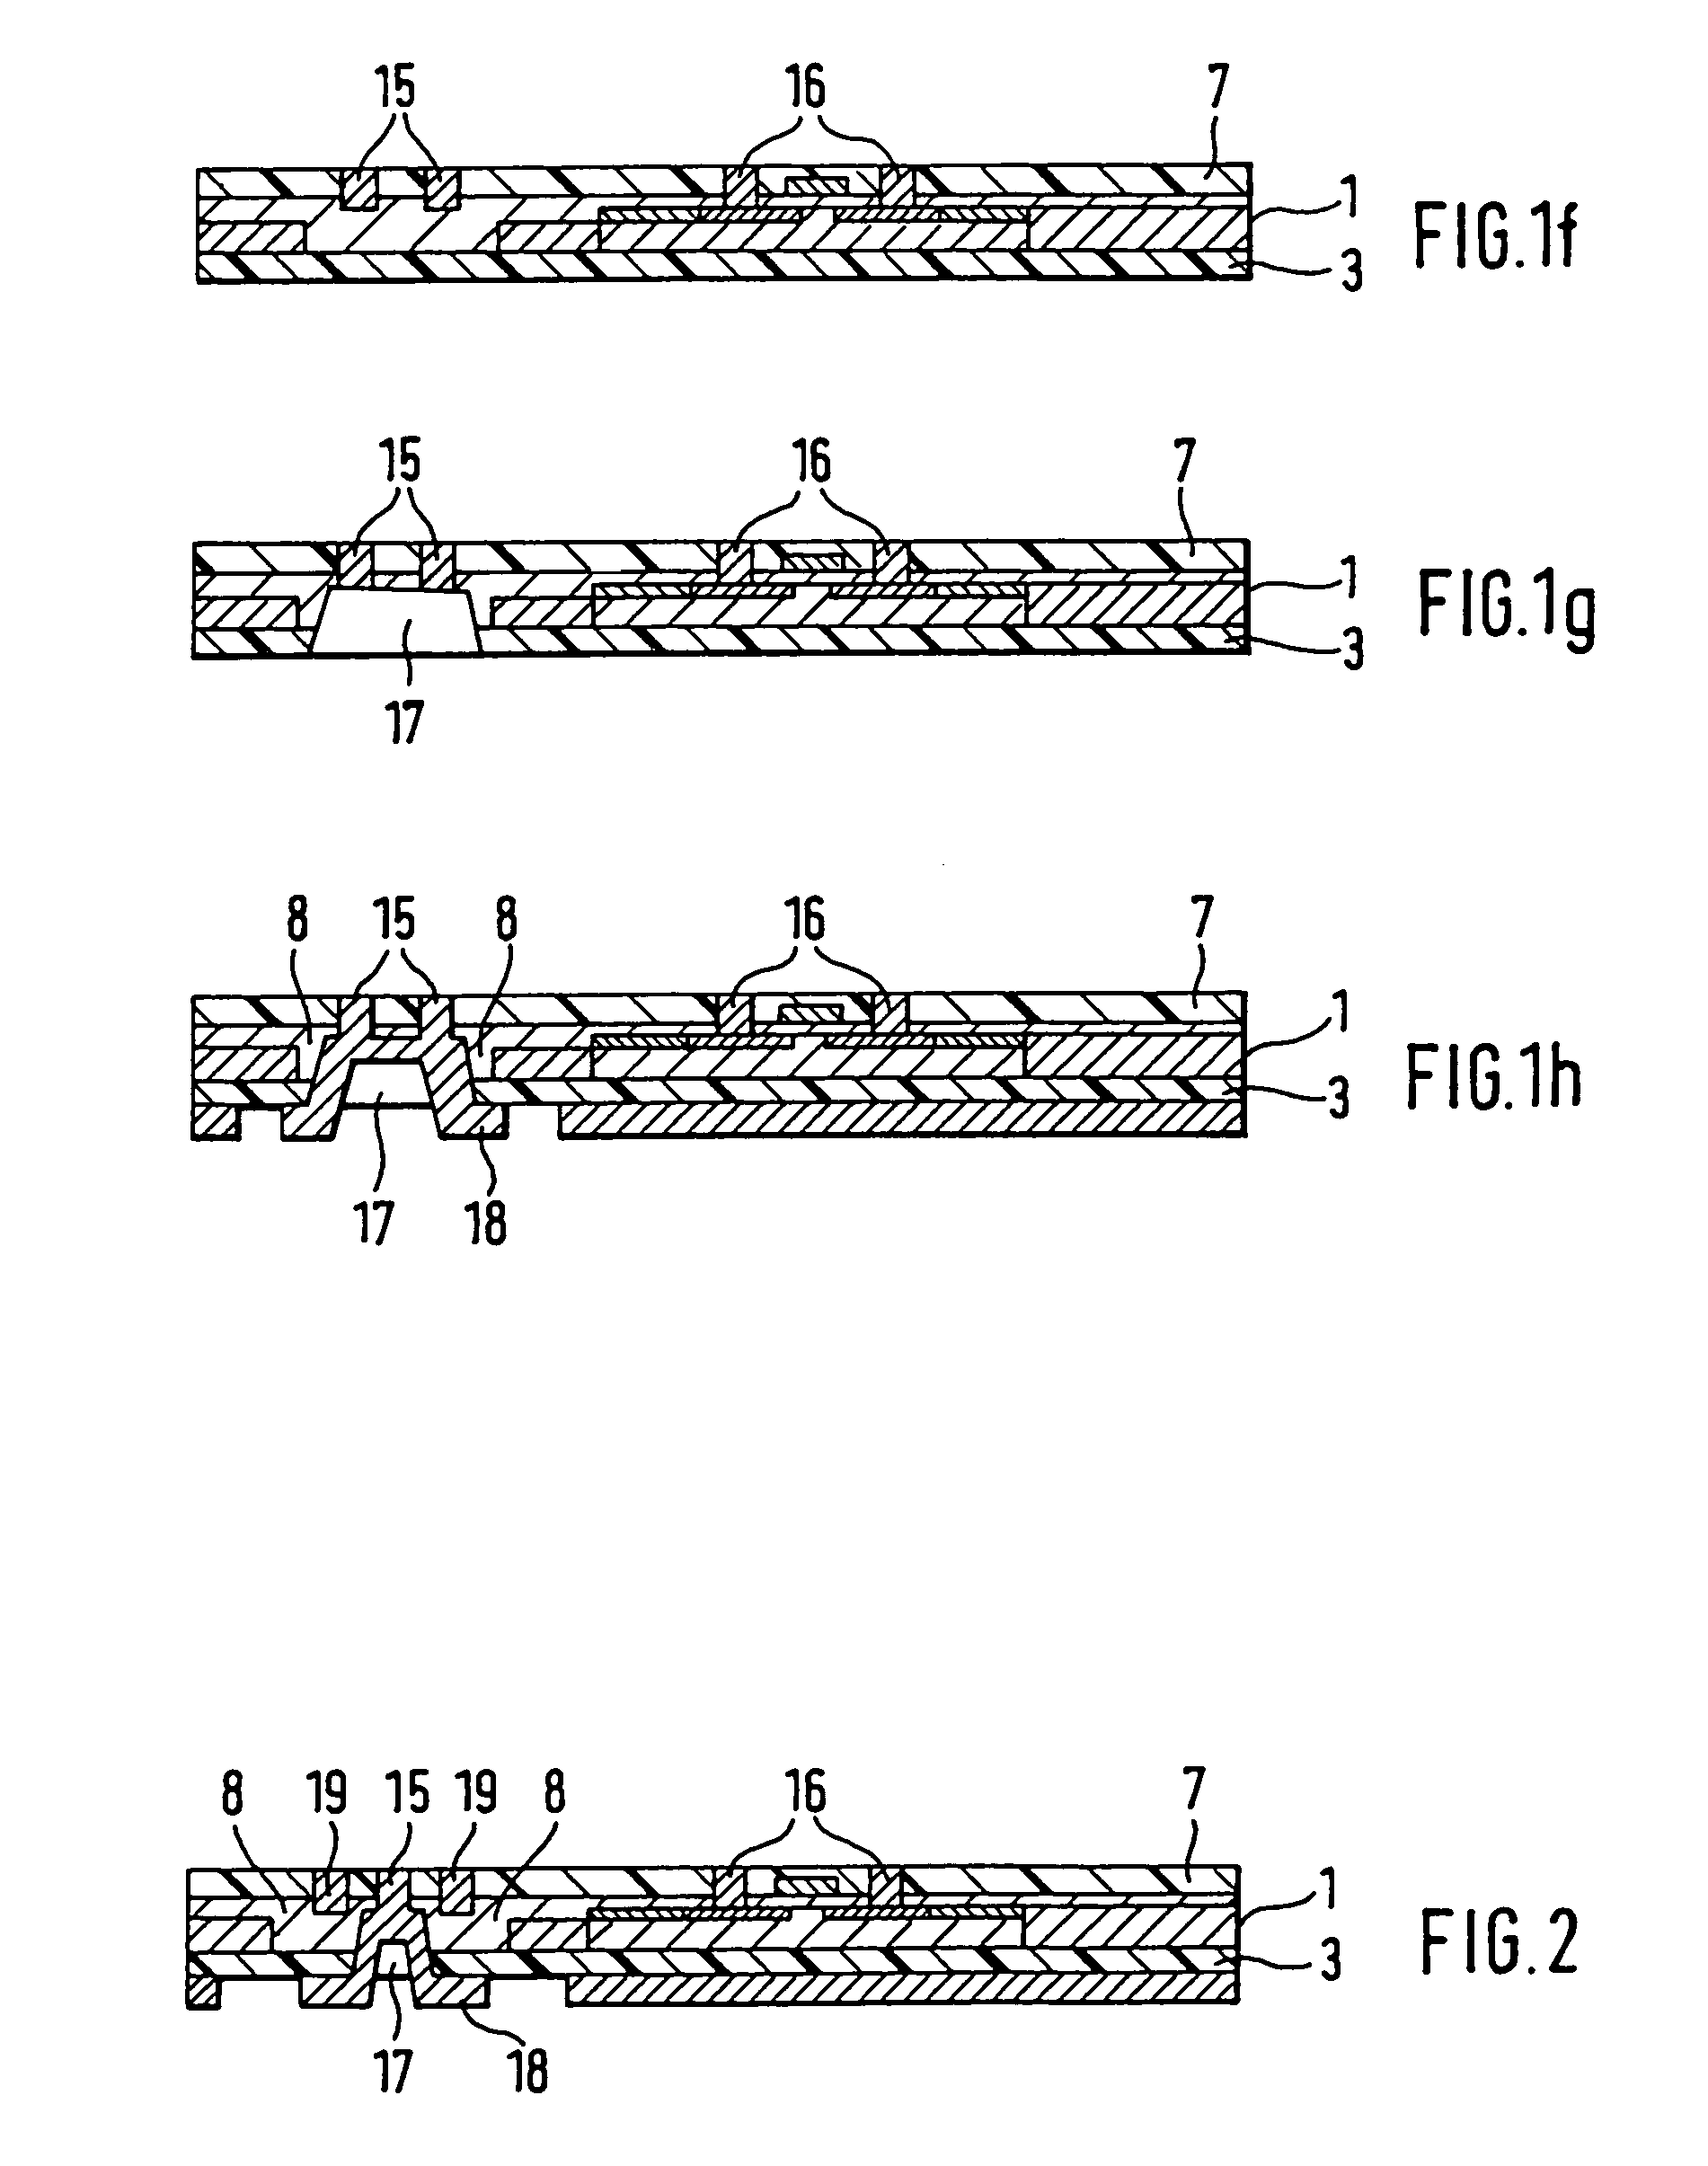 Circuit suitable for vertical integration and method of producing same